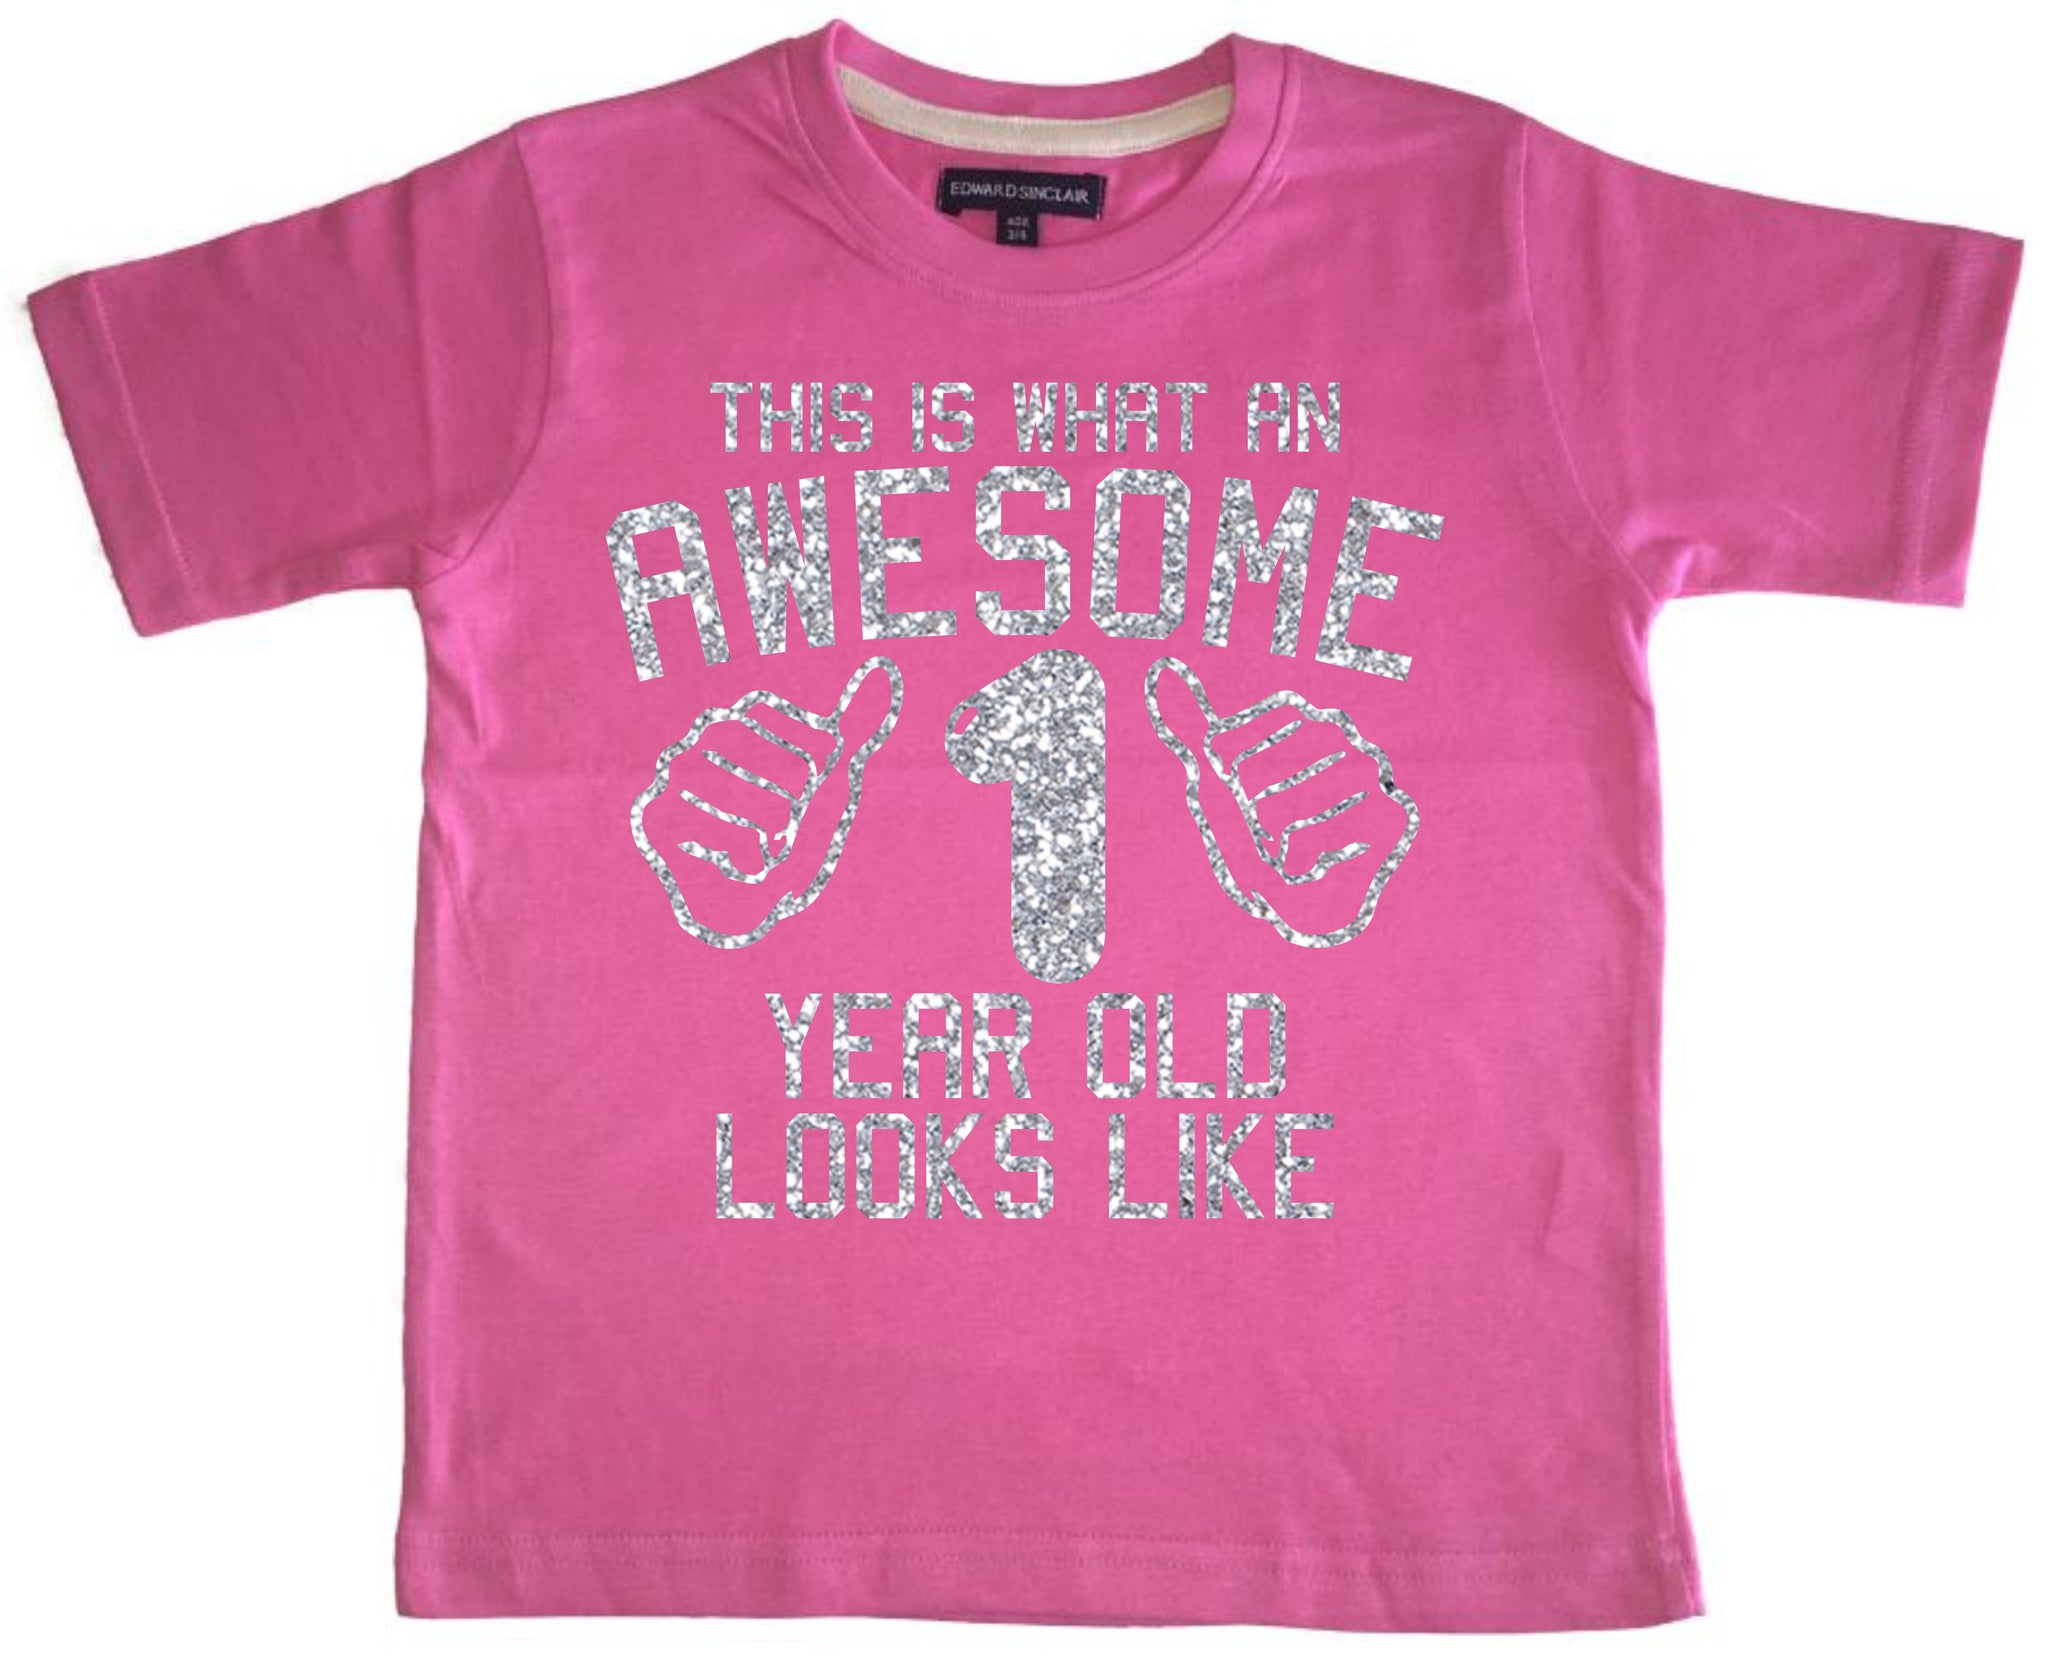 This is What an Awesome 1 Year Old Looks Like Bubblegum Pink T-Shirt with Sparkling Glitter Print